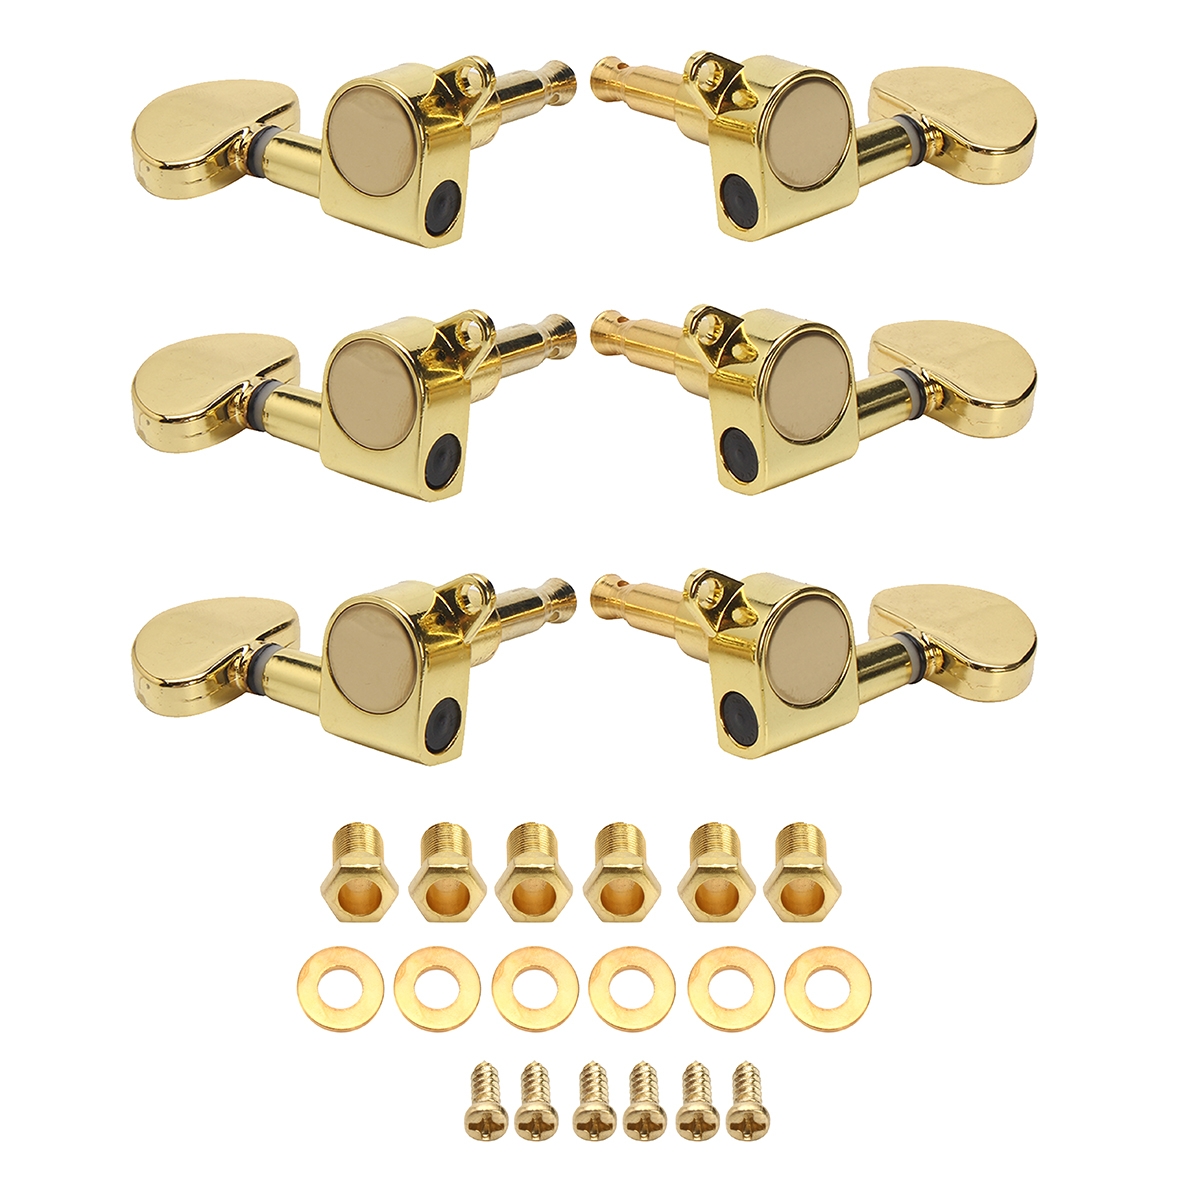 3R3L Semicircle Button Guitar Tuning Pegs Machine Heads Tuners Guitar Parts